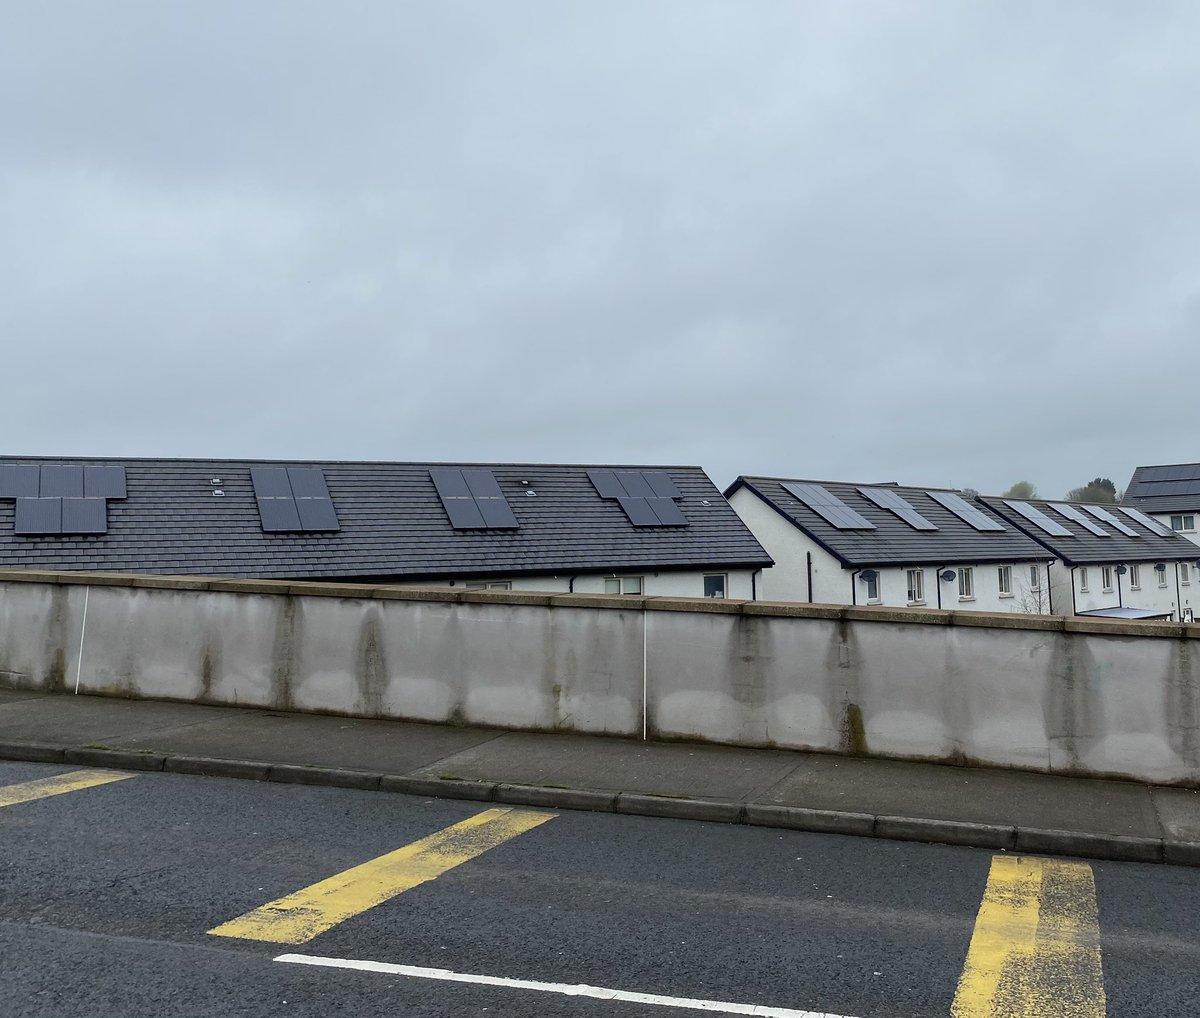 It’s human to find the #climate challenge abstract or overwhelming.
.
Here’s a practical community example of how a local Irish  #Drogheda housing development implemented renewable  roof #solar panels at scale. #Louthchat
.
Efficient and easily learned from, rolled out …